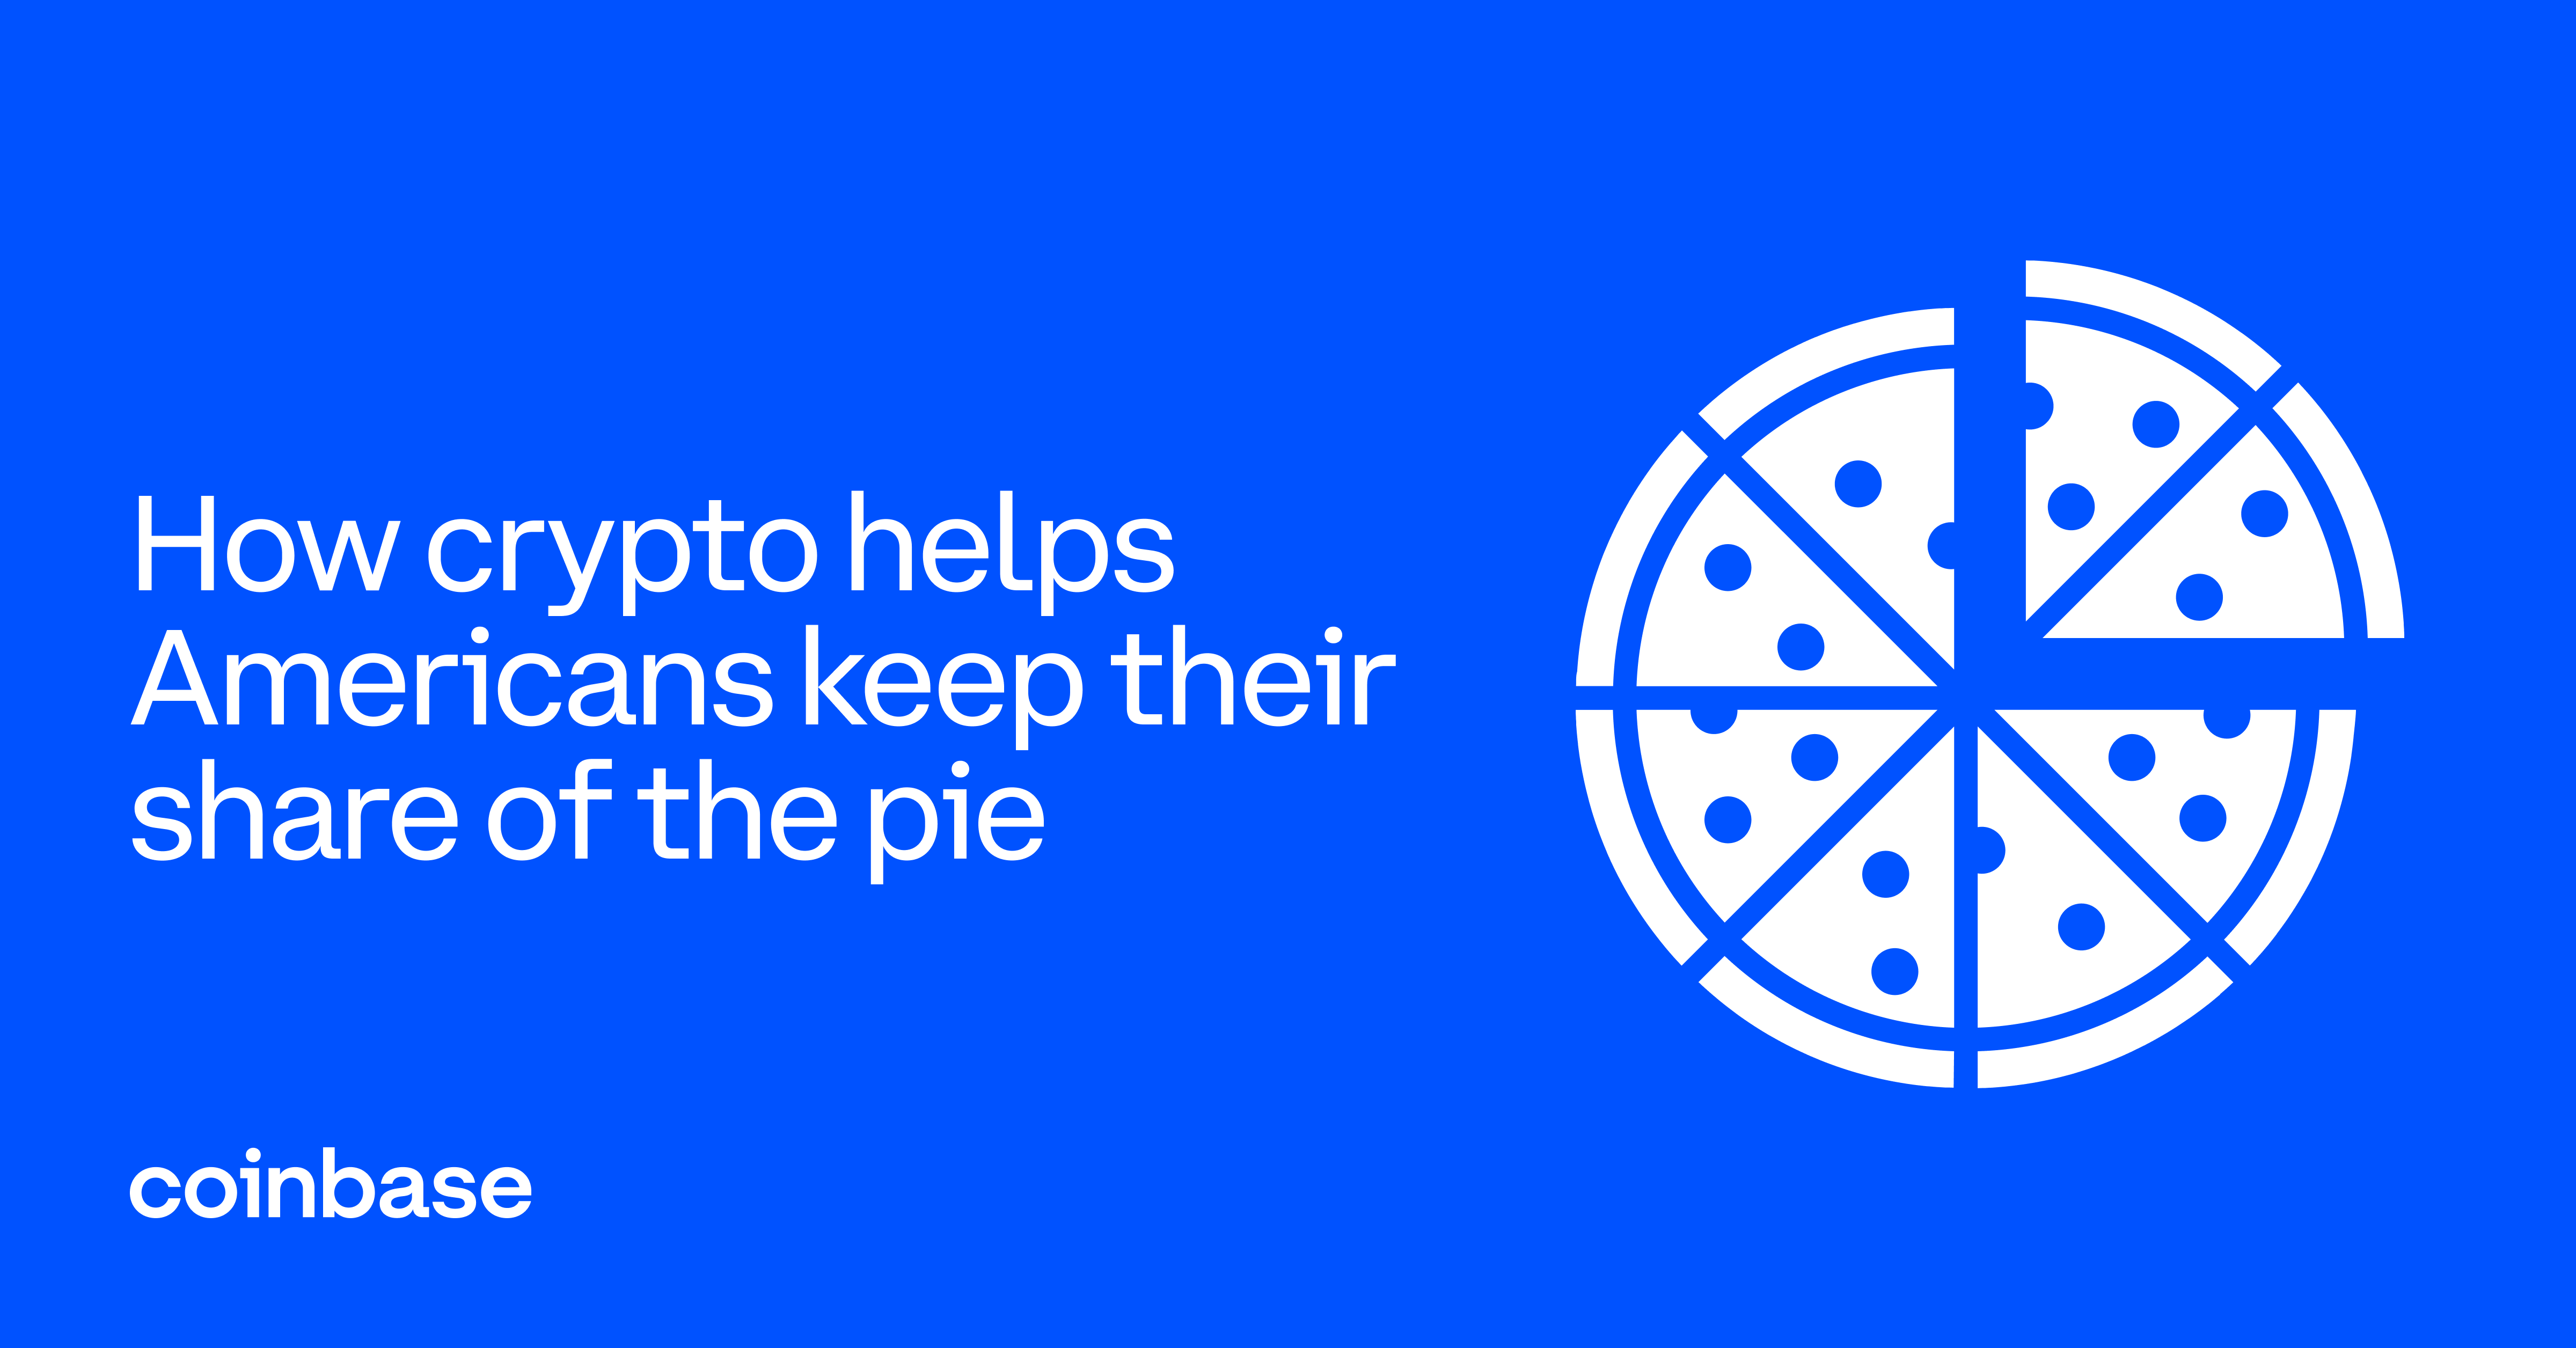 Keep your share of the pie